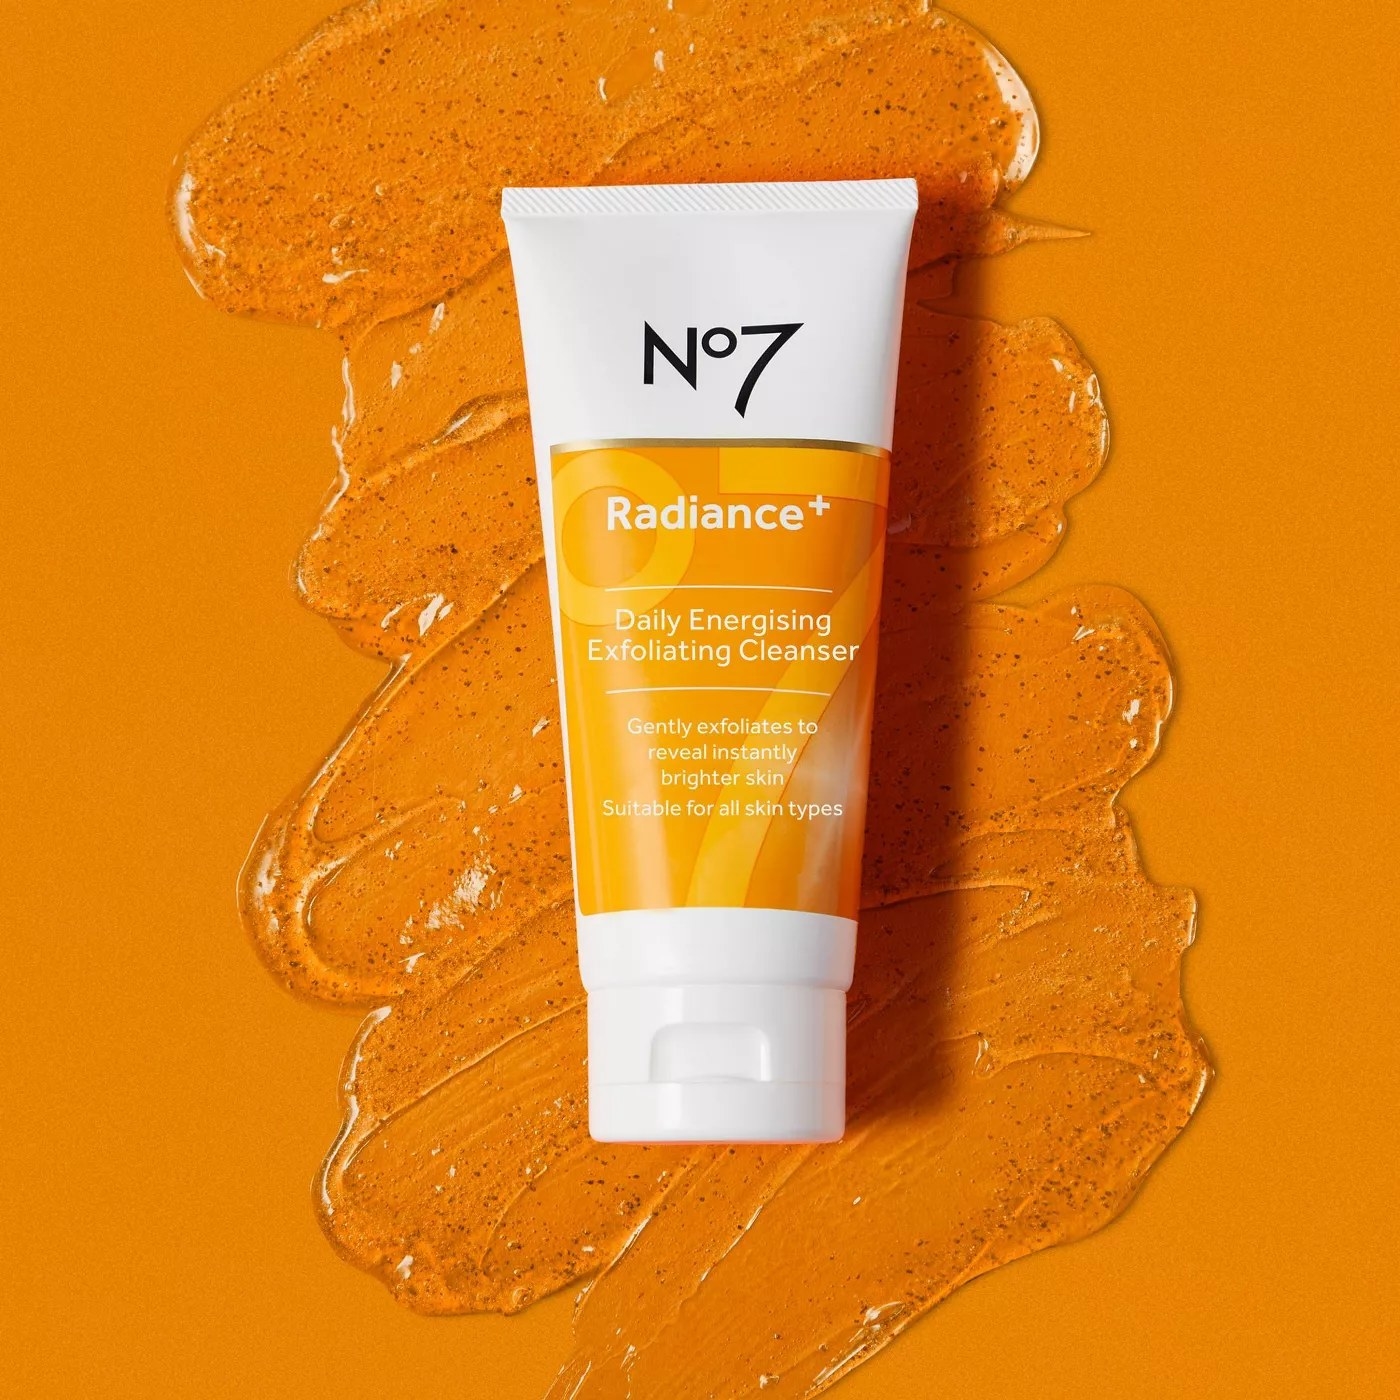 No7 Radiance Daily Energising Exfoliating Cleanser